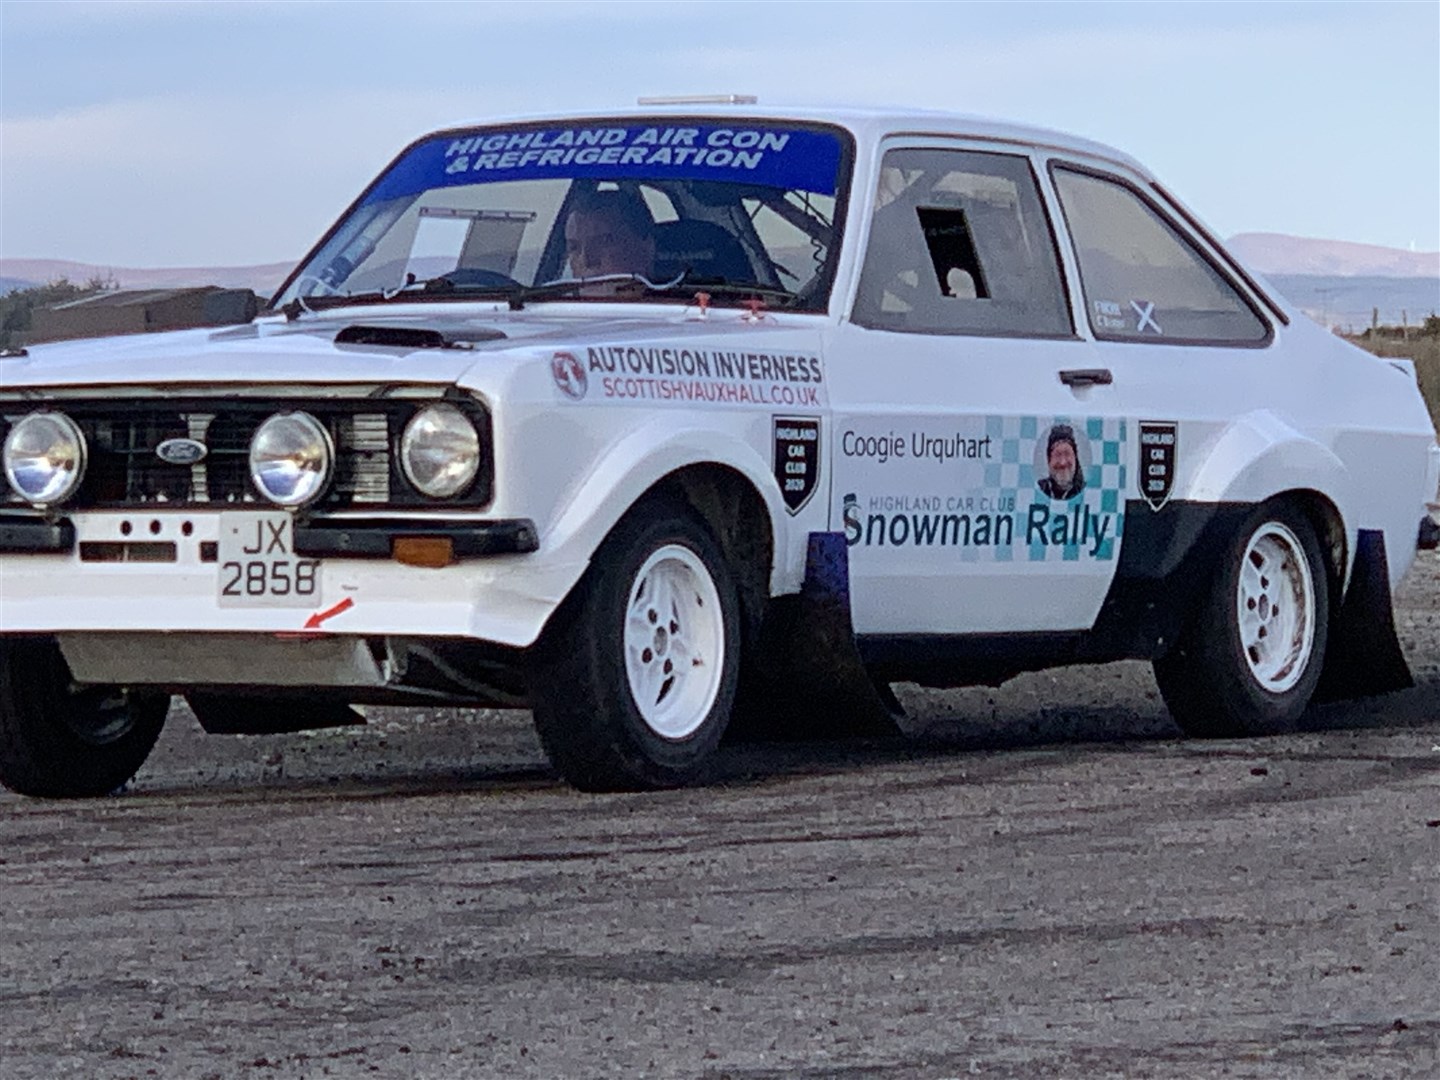 The 'zero car' Kate Forbes will travel in briefly when the Snowman Rally comes to Dingwall.